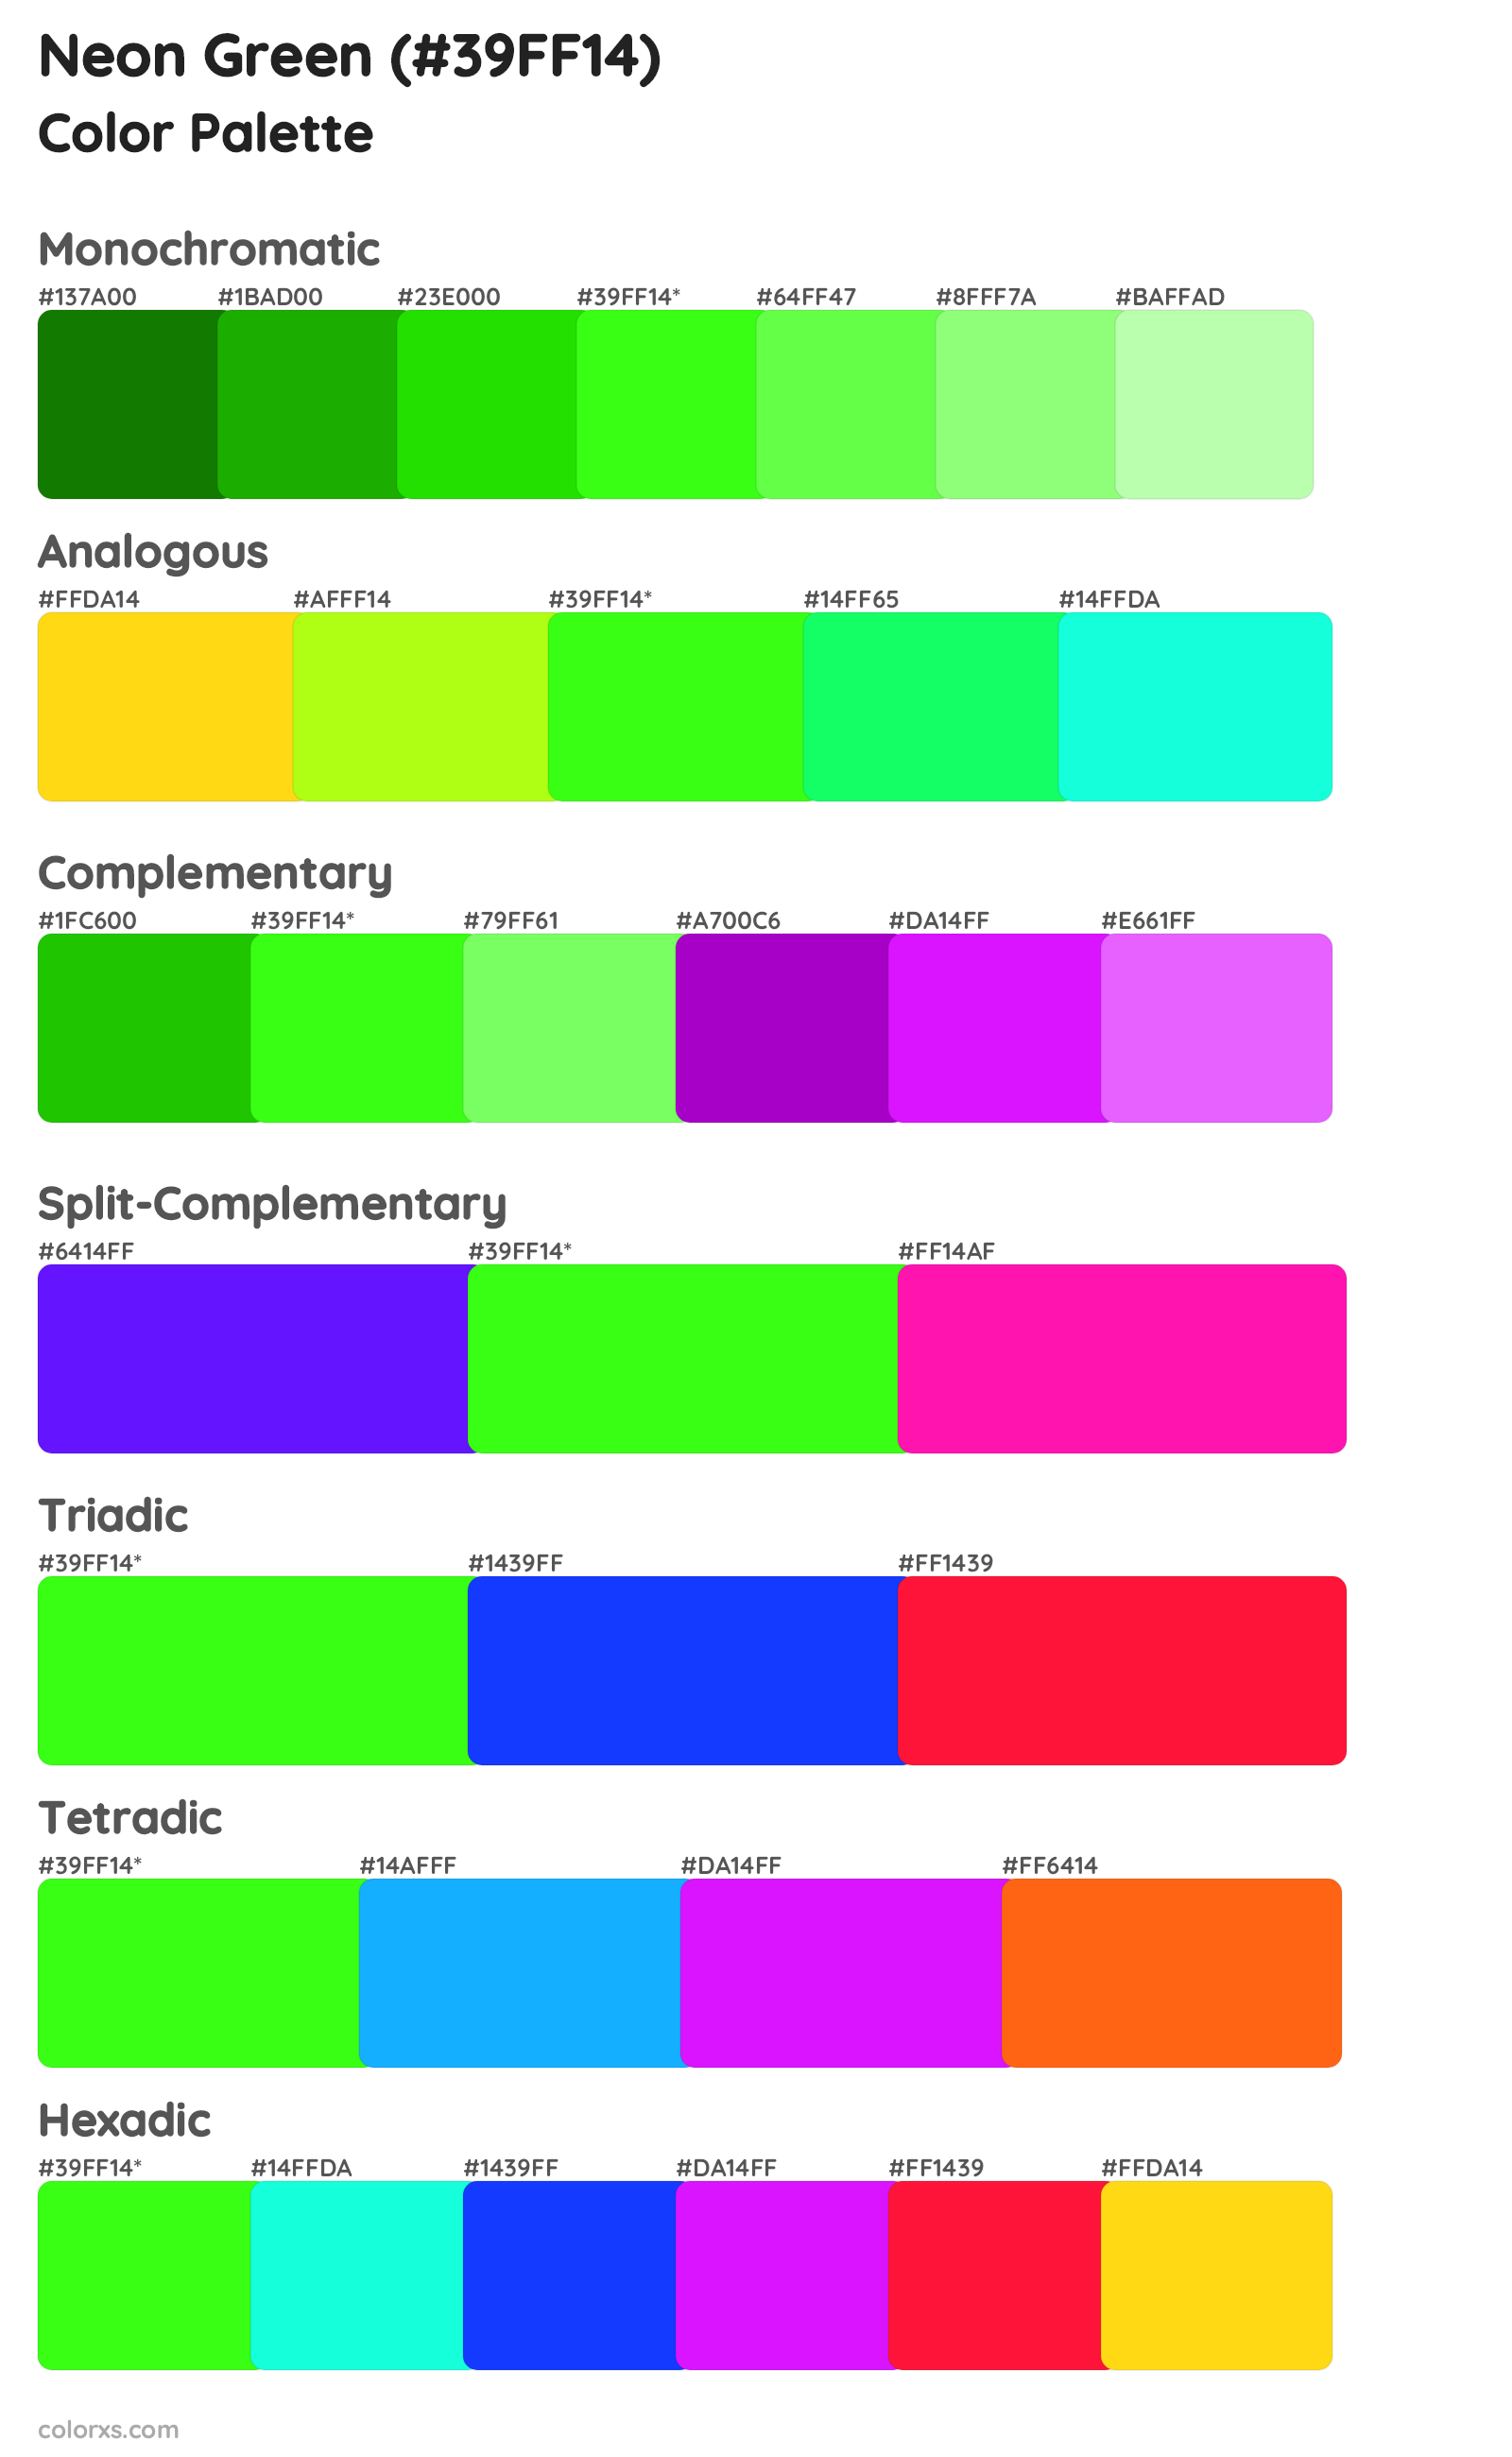 Neon Green color palettes and color scheme combinations